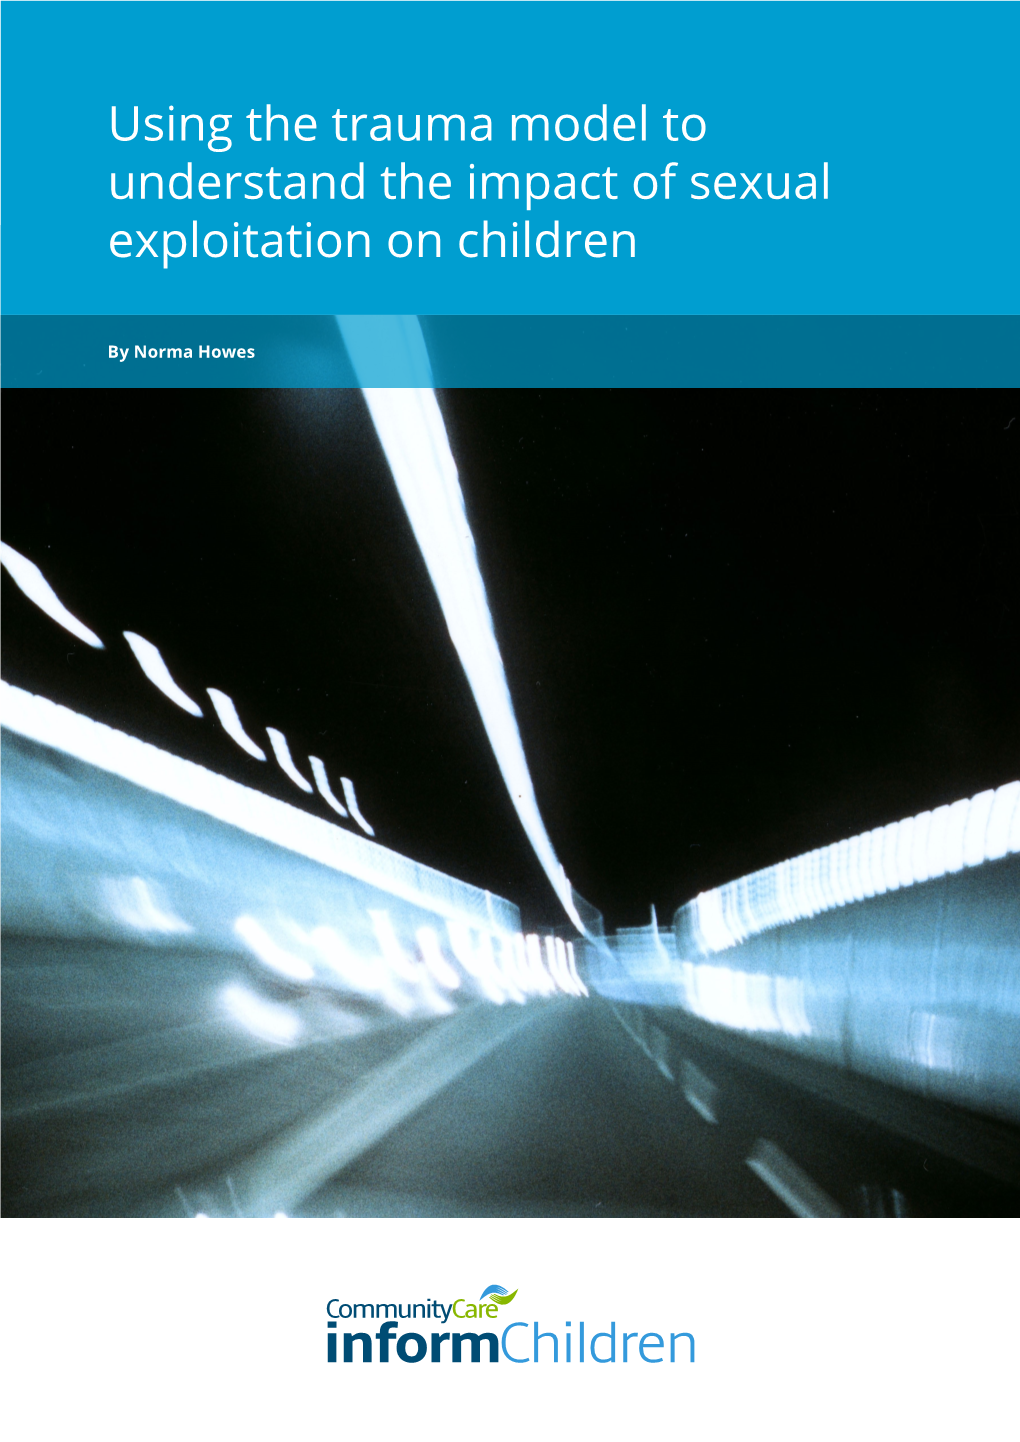 Using the Trauma Model to Understand the Impact of Sexual Exploitation on Children